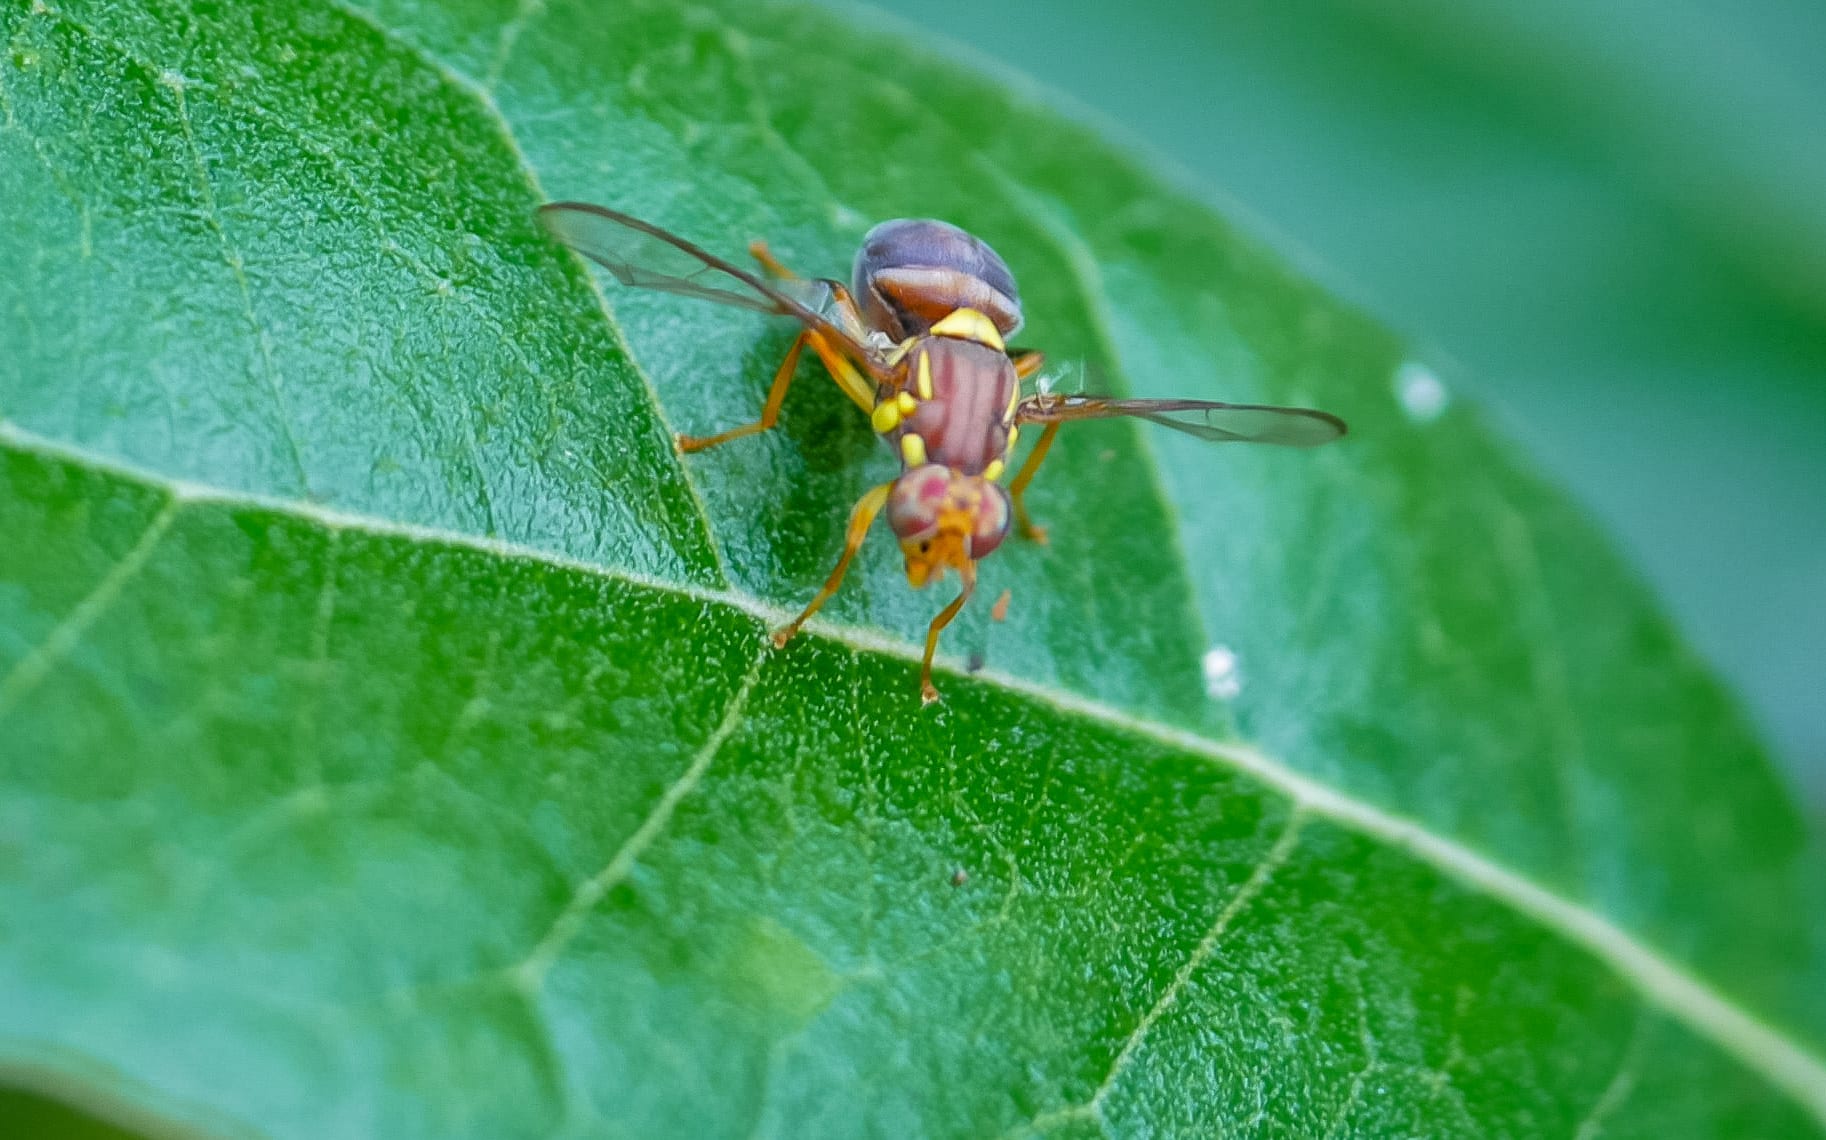 close up shot of a queensland fruit fly on a feijoa leaf. The qld fruit fly is a serious agricultural pest causing millions of dollars of damage every year